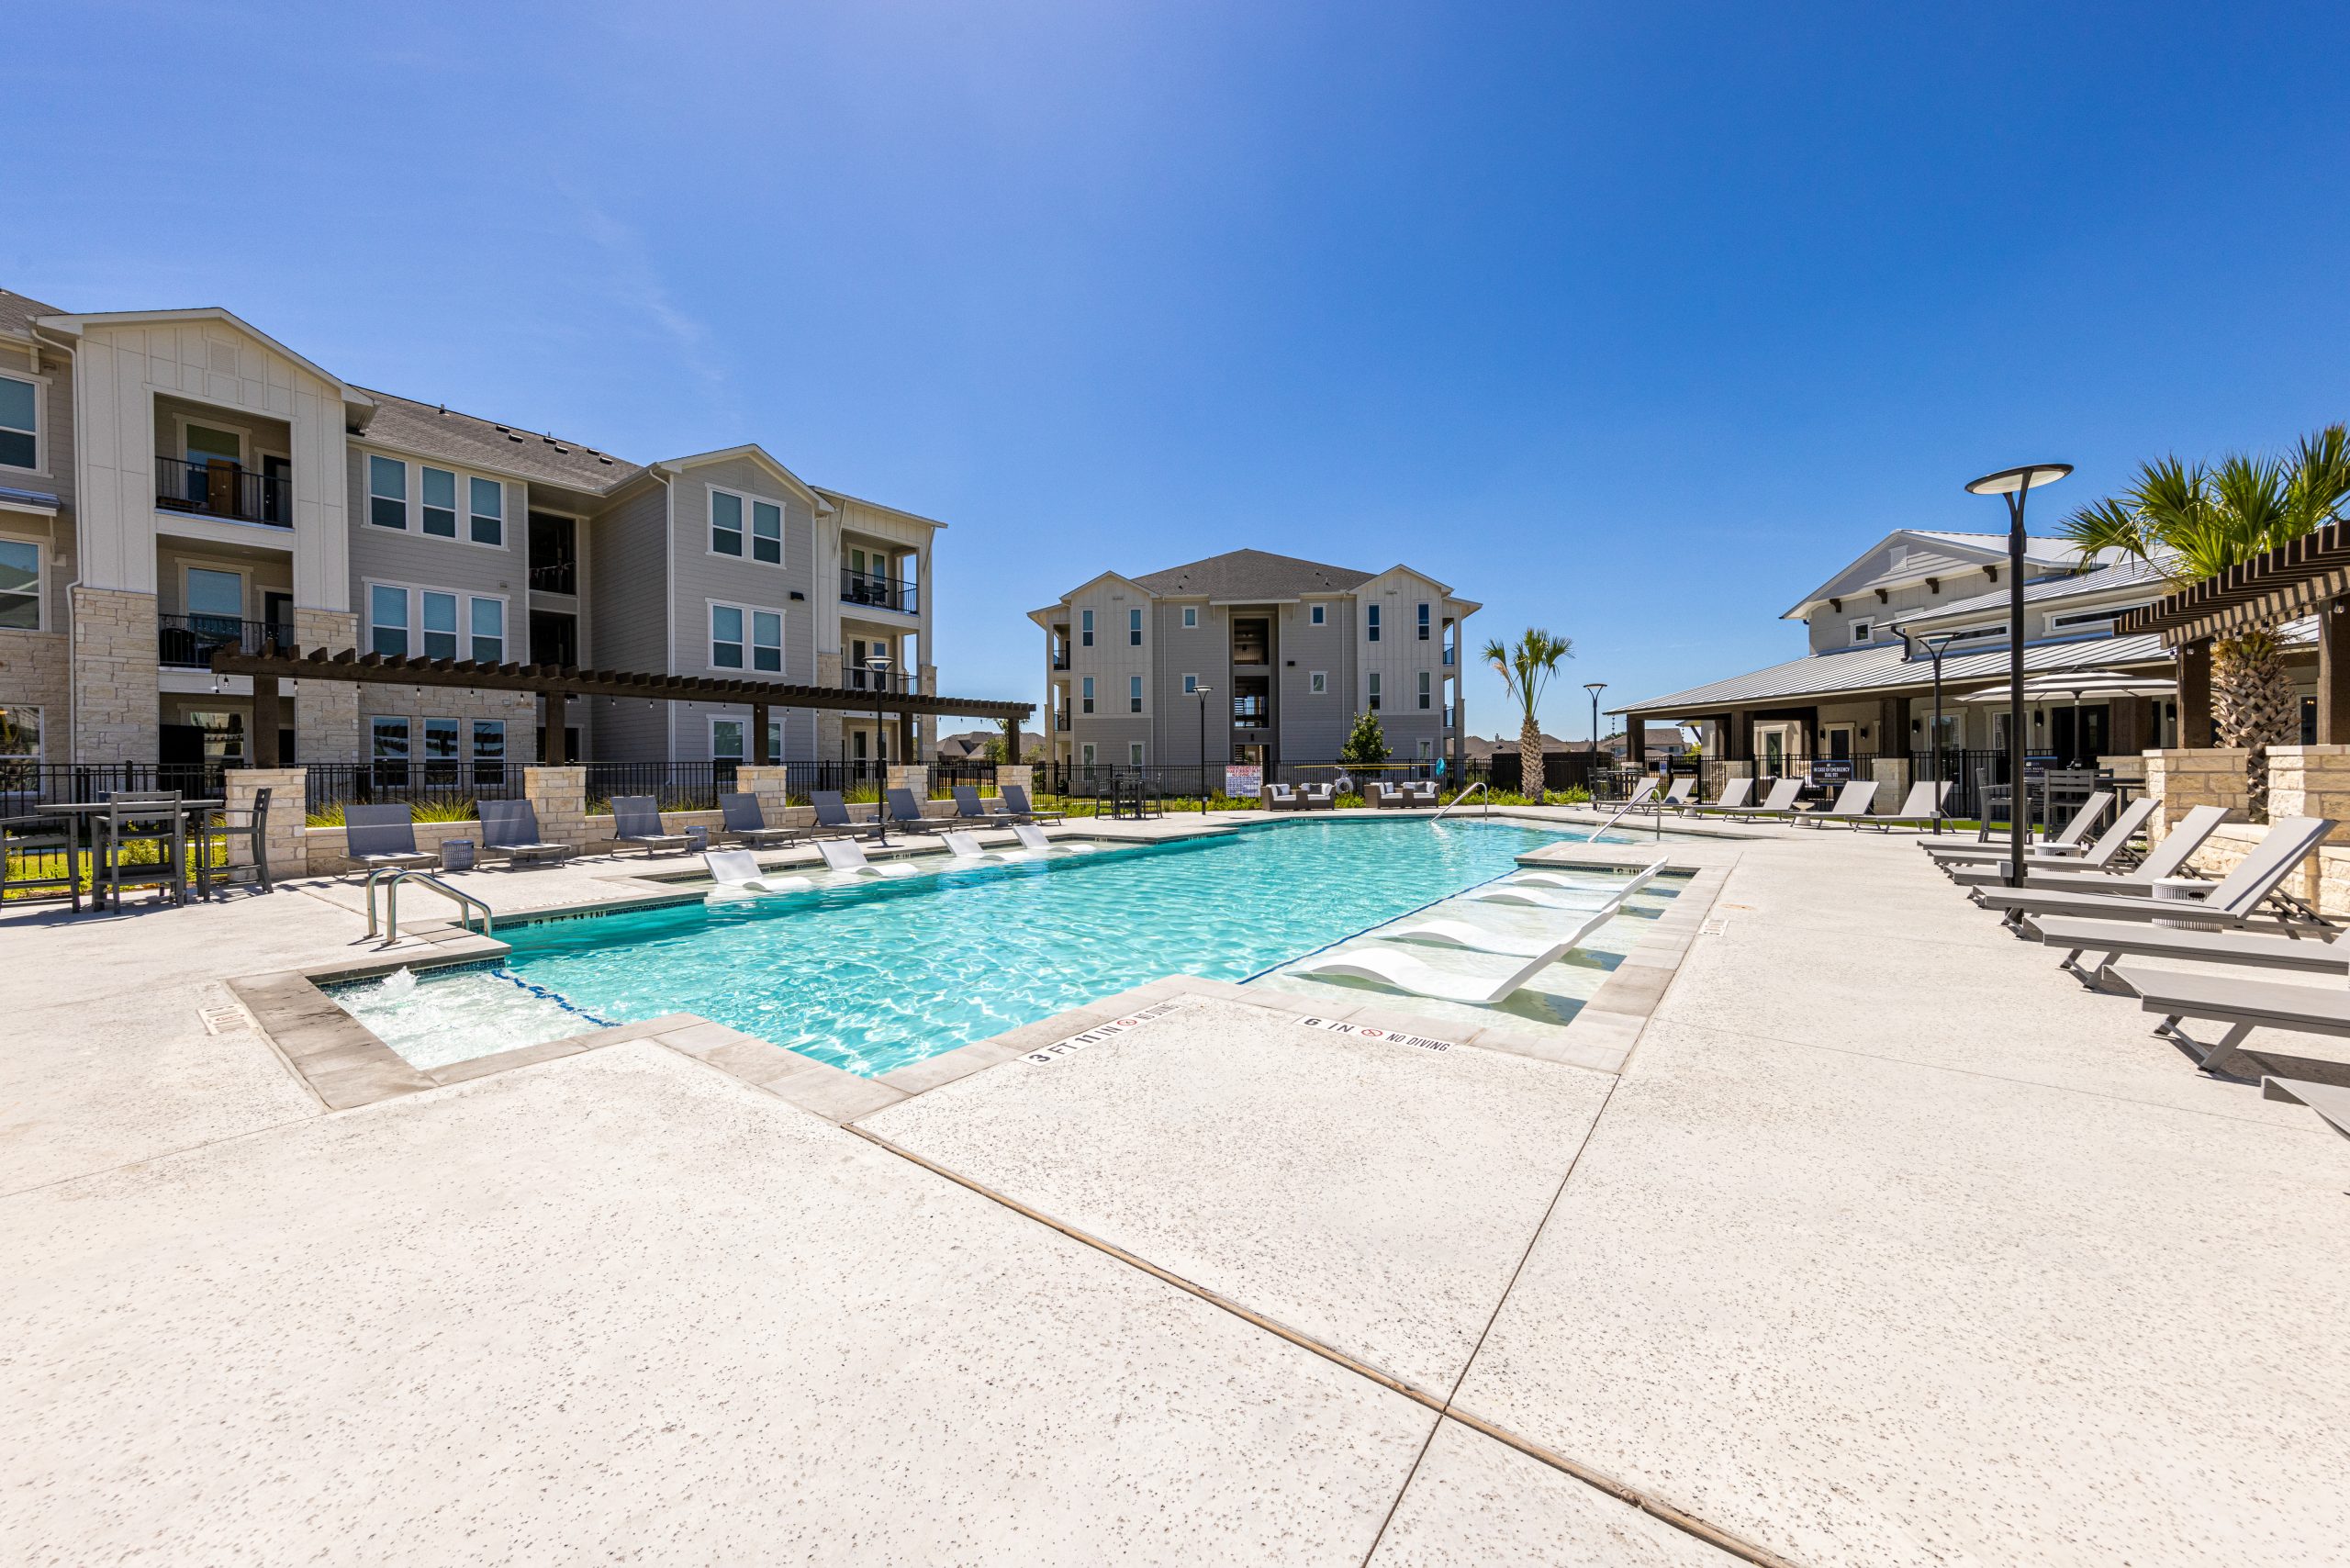 daytime photo of the pool at a multi-family commercial property